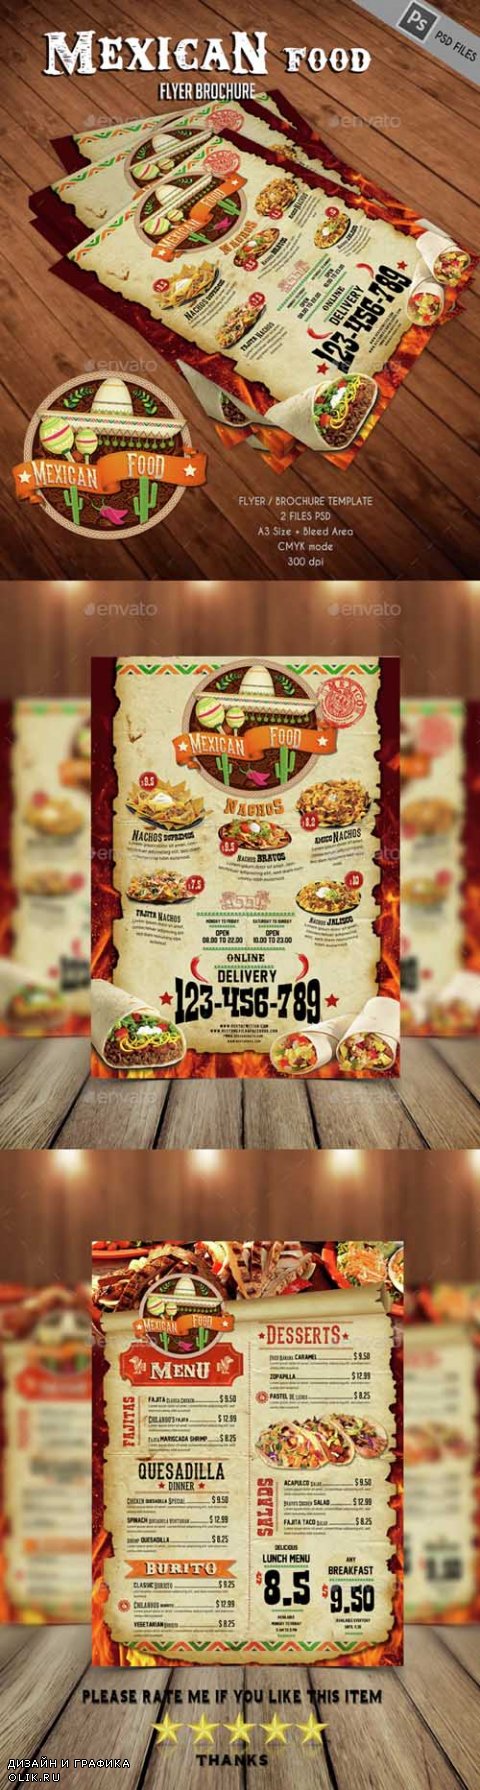 Mexican Food 14675797